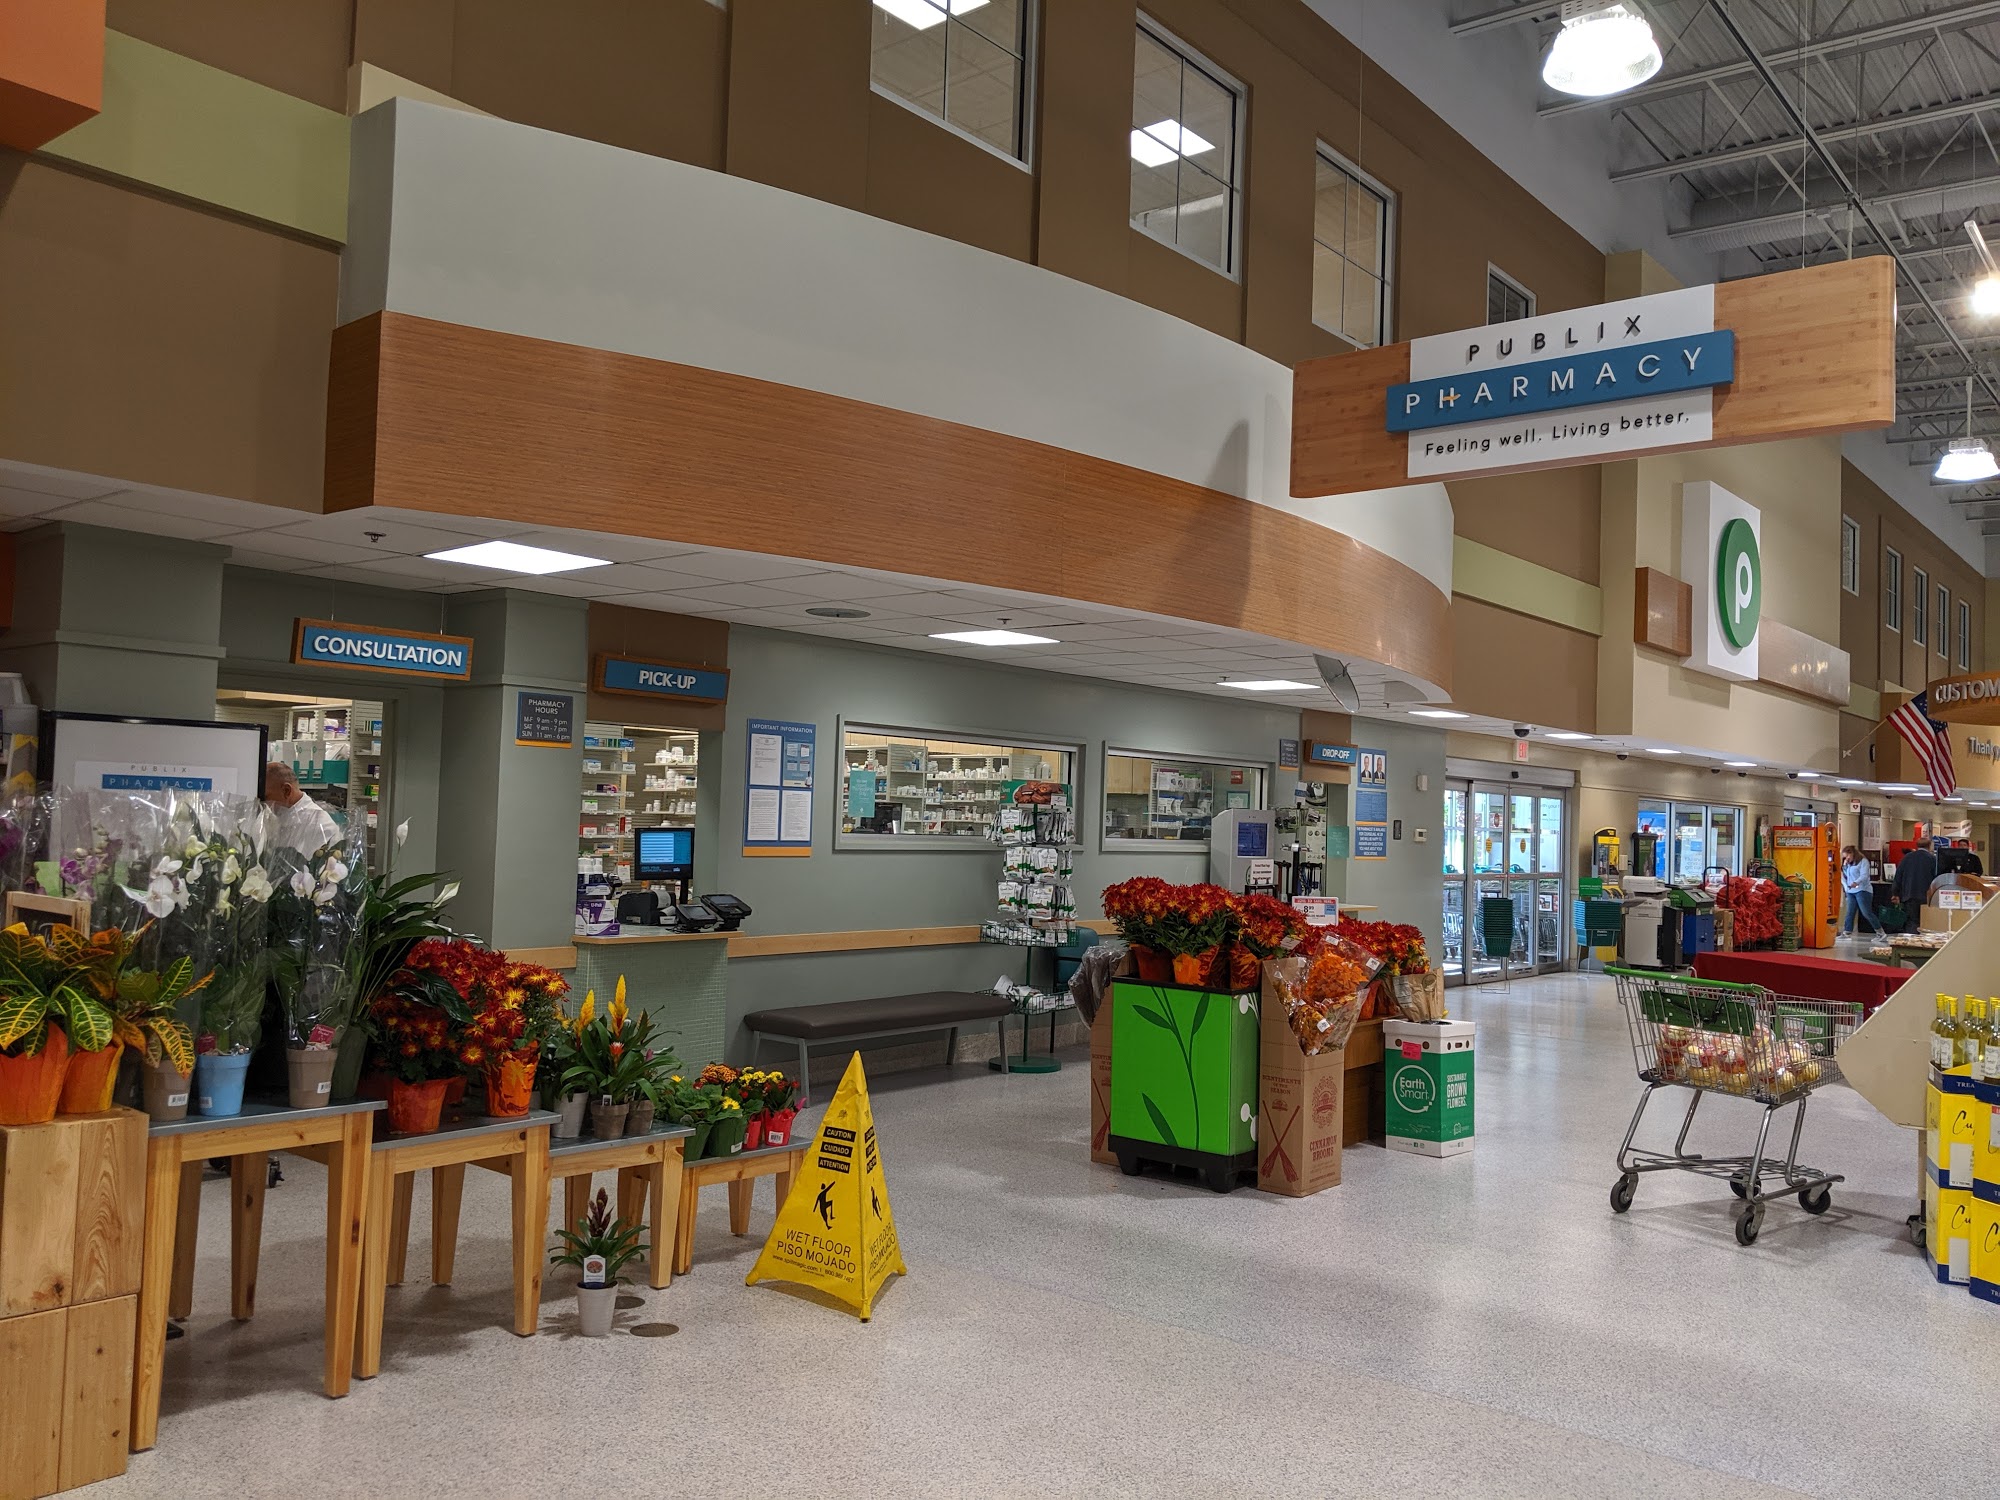 Publix Pharmacy at The Village at Flynn Crossing